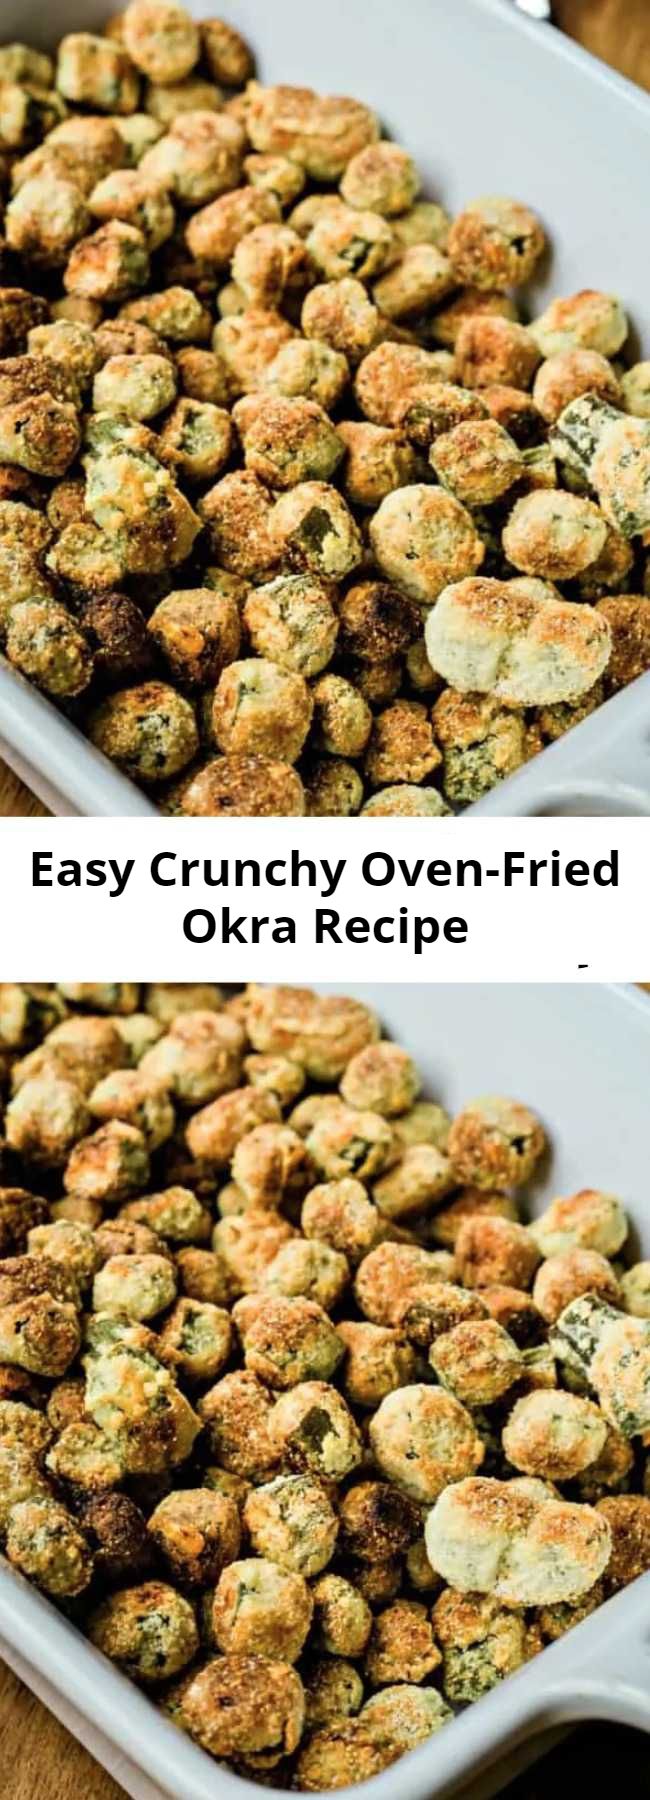 Easy Crunchy Oven-Fried Okra Recipe - This recipe is a bit healthier and easier to prepare. Make this delicious and Crunchy Oven-Fried Okra just one time and you may never go back to cooking fried okra on the stove! Plus, this “fried” okra recipe uses a fraction of the oil that you would need when pan frying which is an added health benefit!